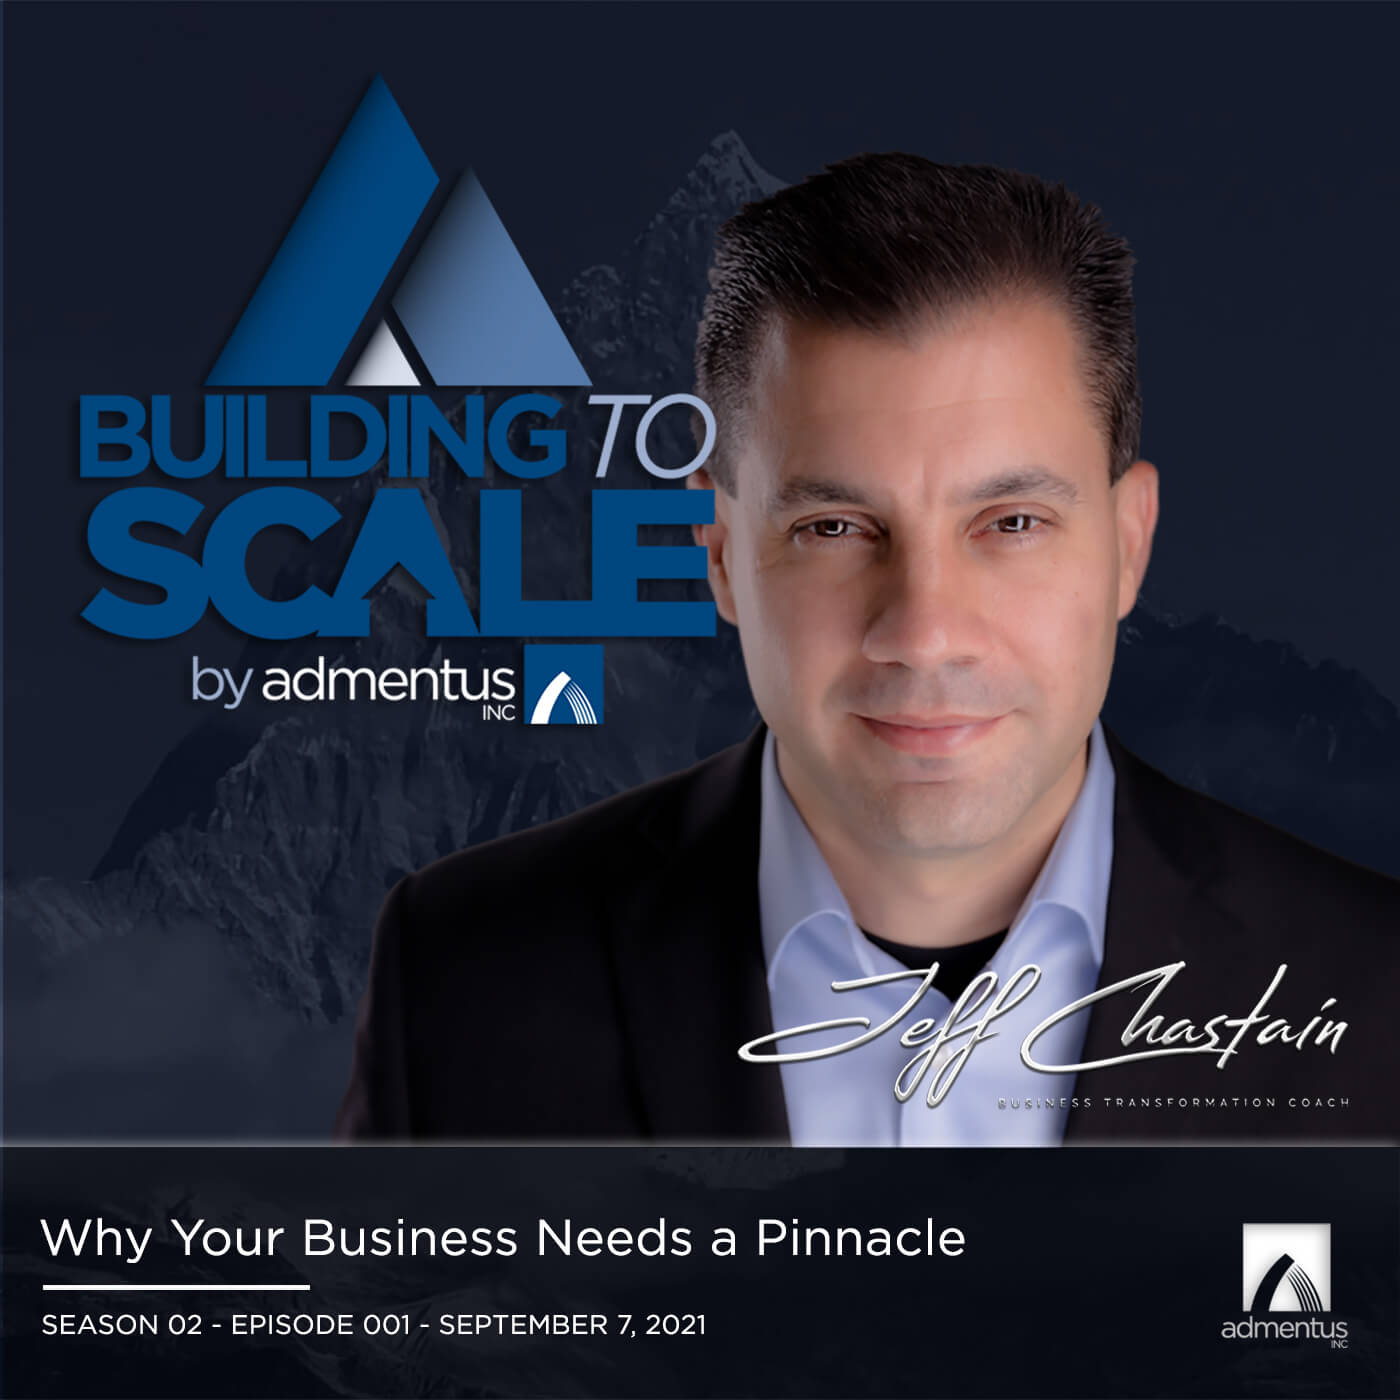 Why Your Business Needs a Pinnacle